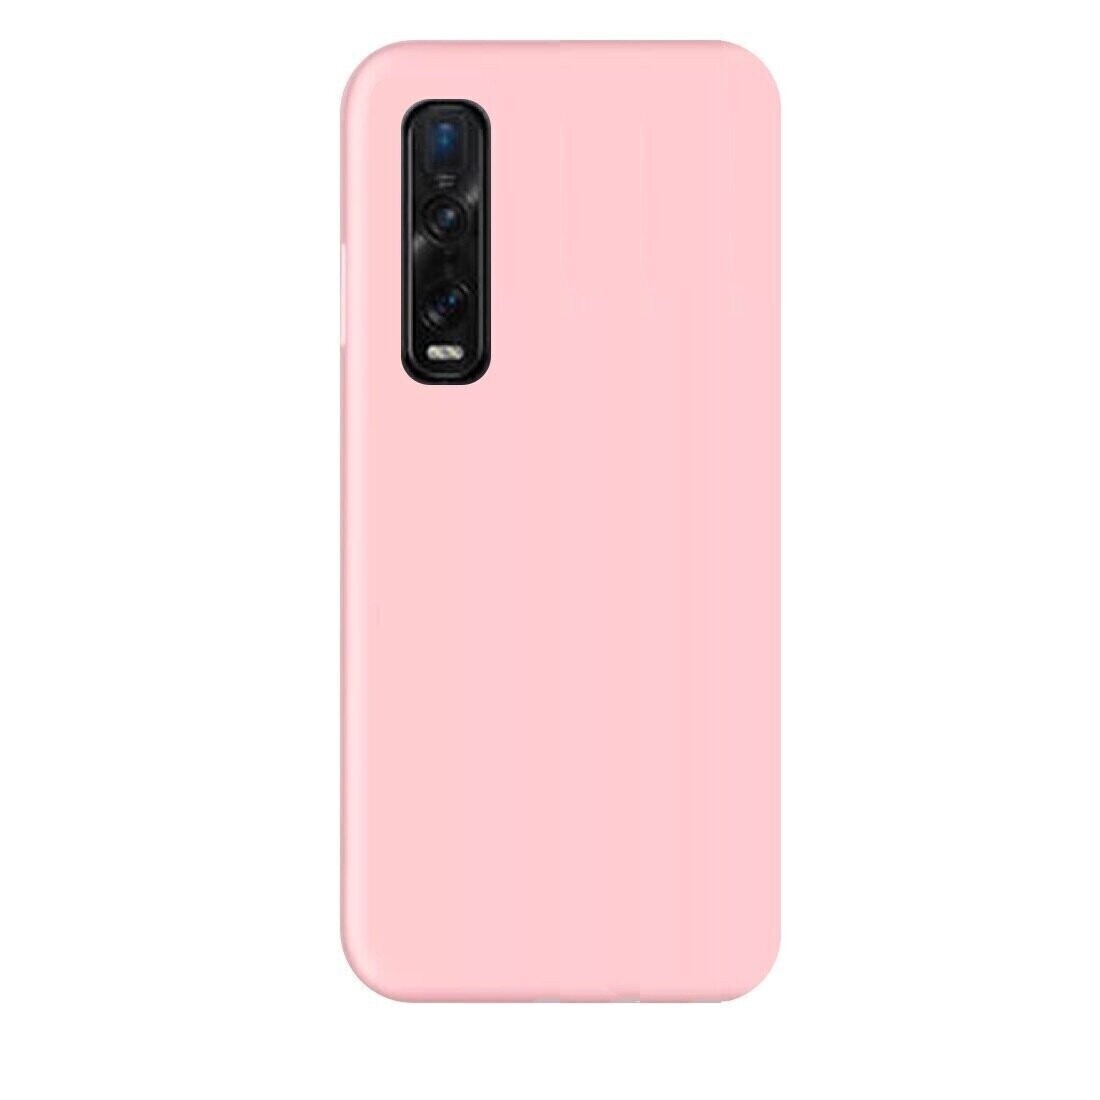 Komass Oppo Find X2 Pro Liquid Silicone Back Cover, Pink